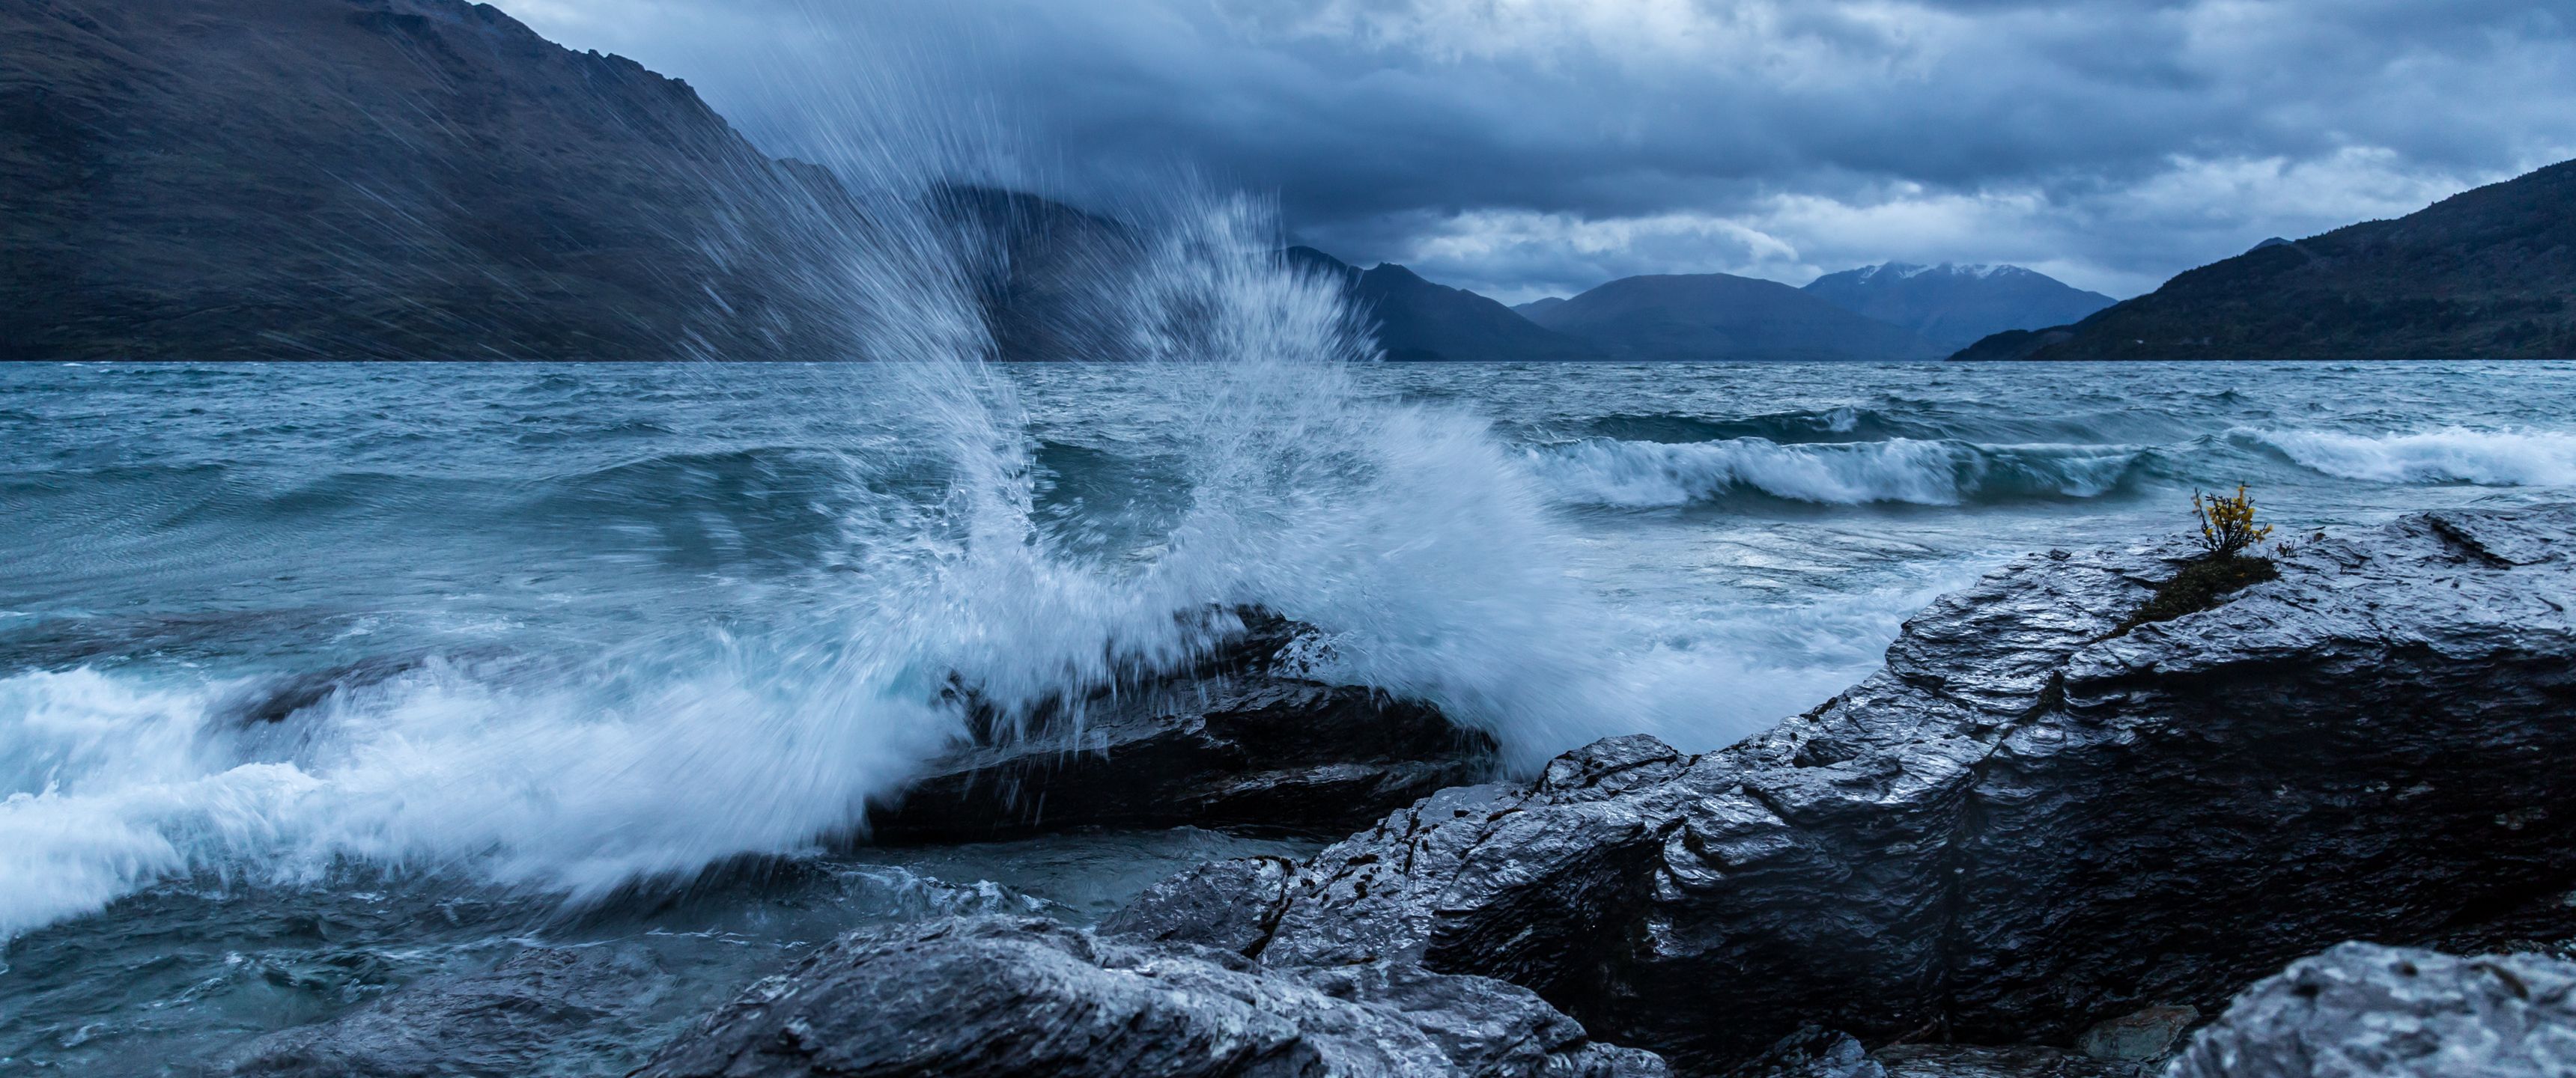 A large wave is crashing against the rocks - 3440x1440